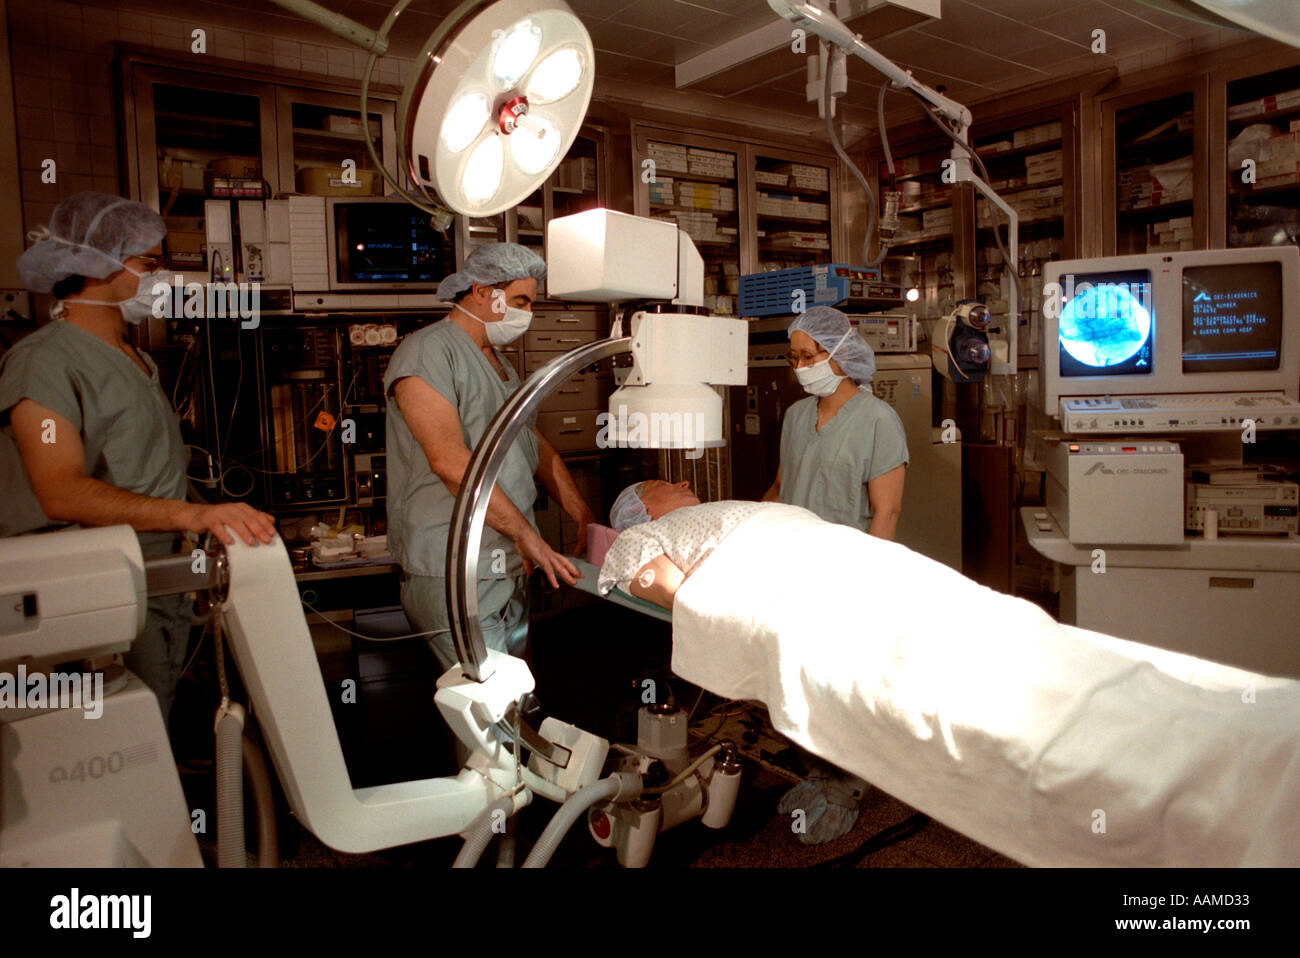 Three surgeons looking over a patient in an operating room in Beth Israel Hospital located in Queens New York Stock Photo